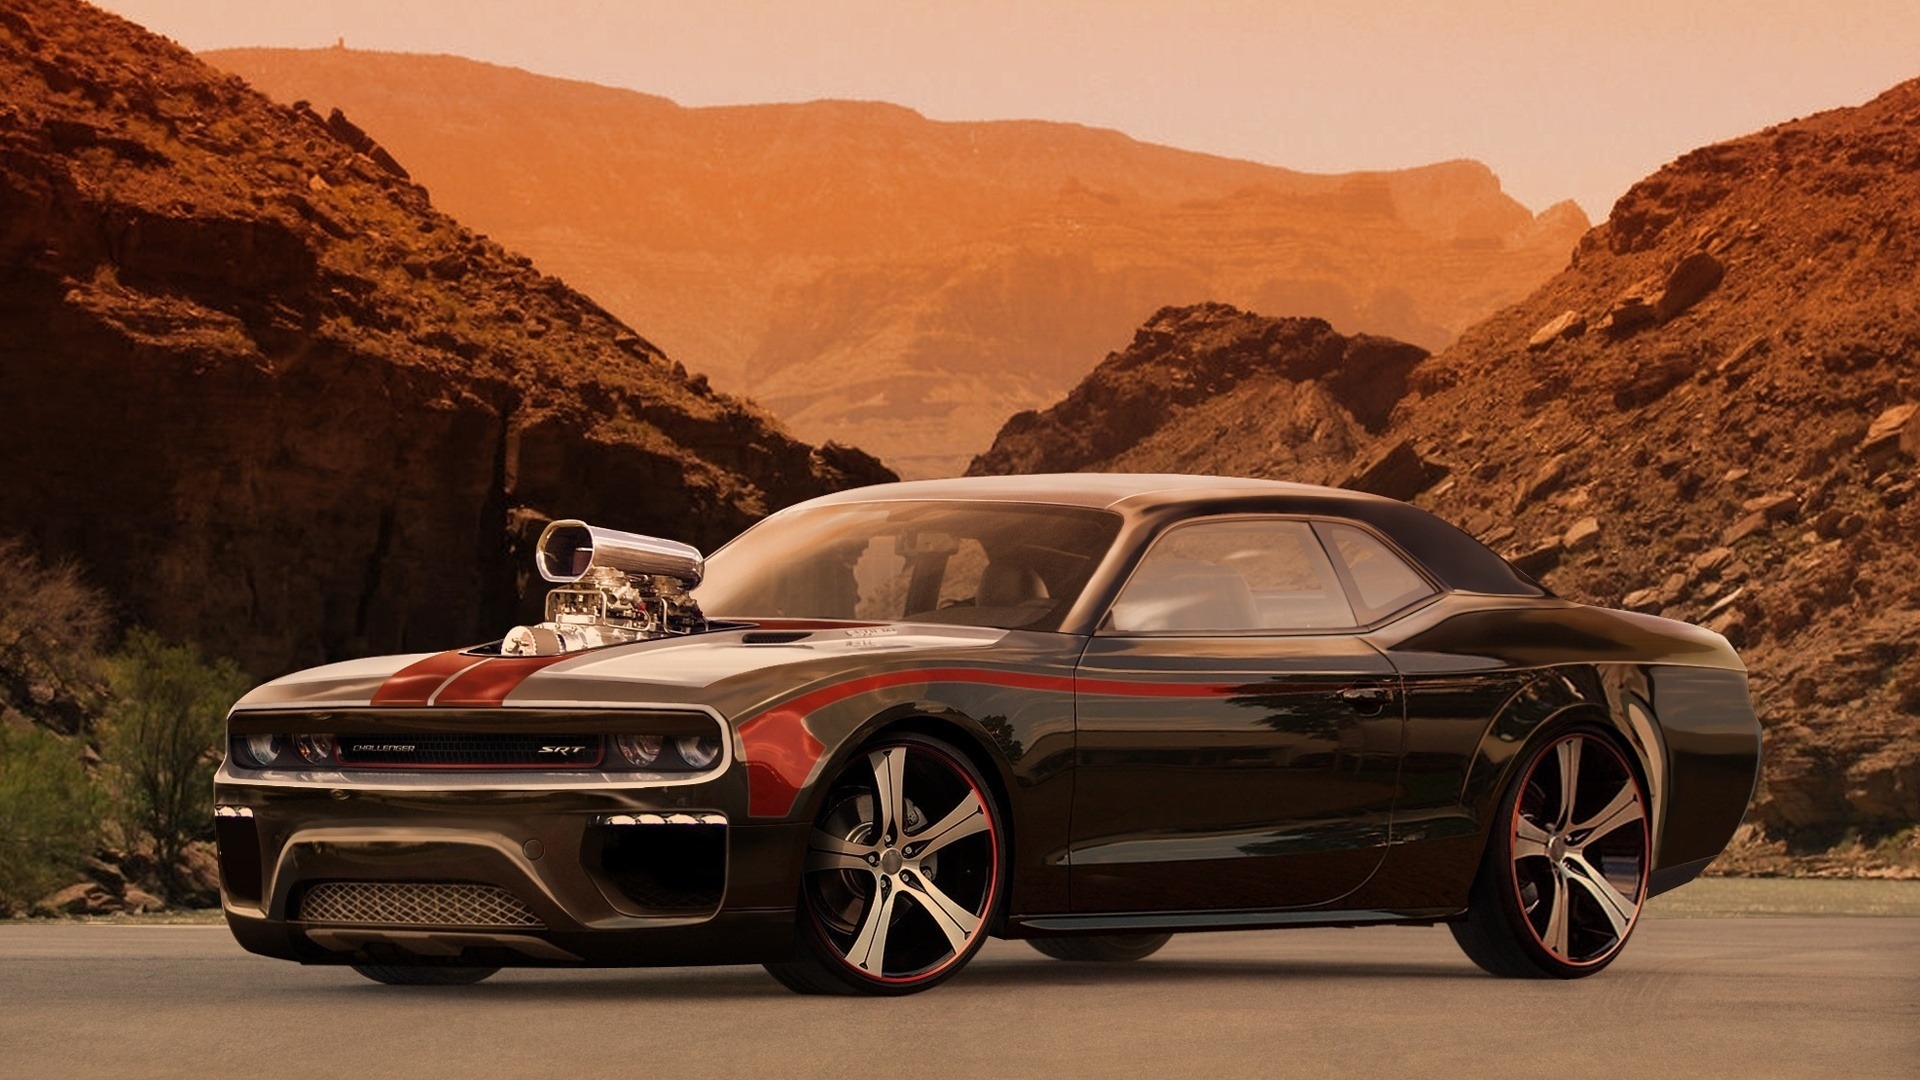 Awesome Dodge Challenger Wallpaper